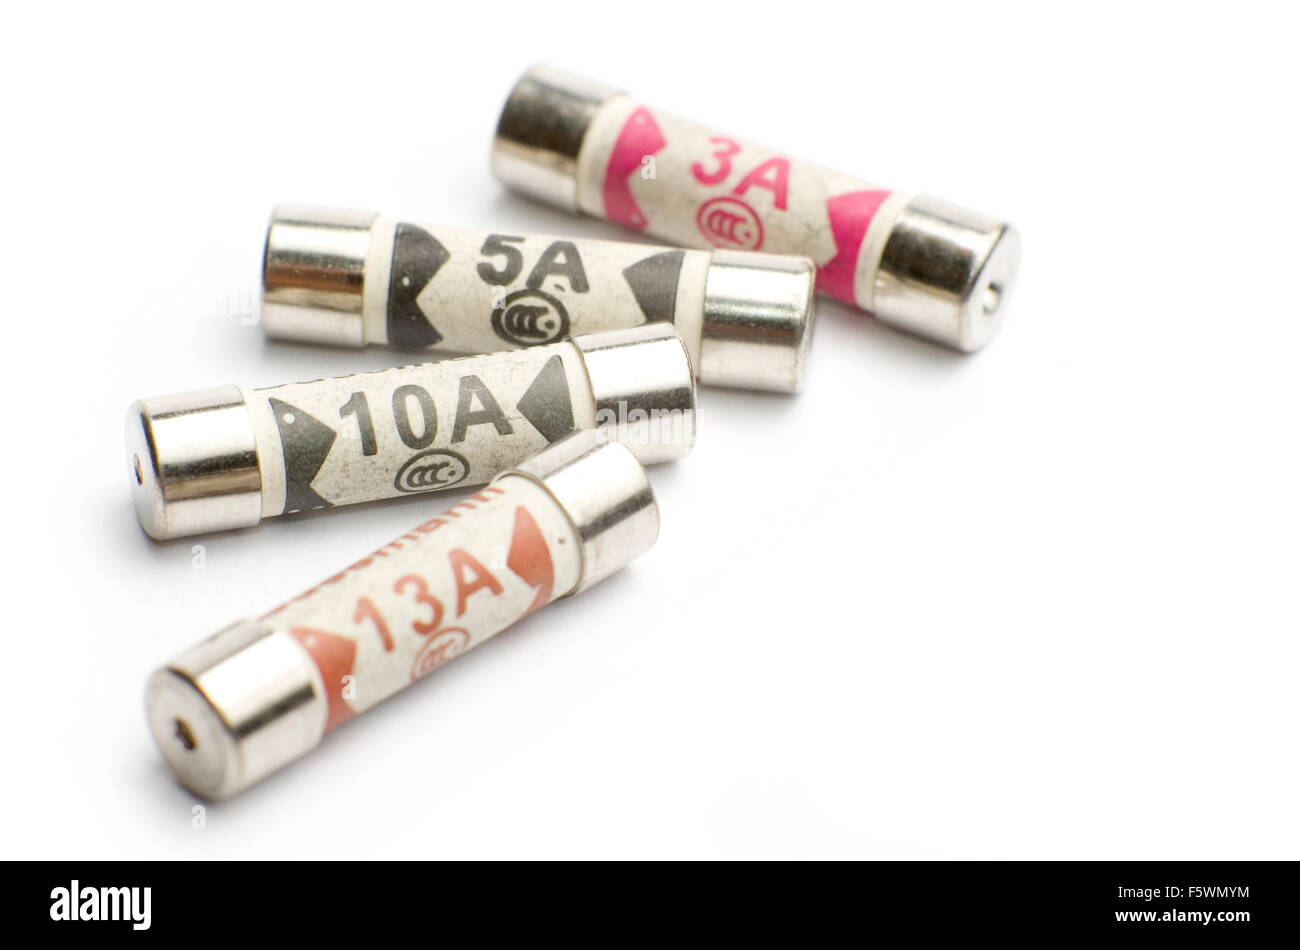 UK Standard domestic fuses 3A, 5A, 10A and 13A Stock Photo